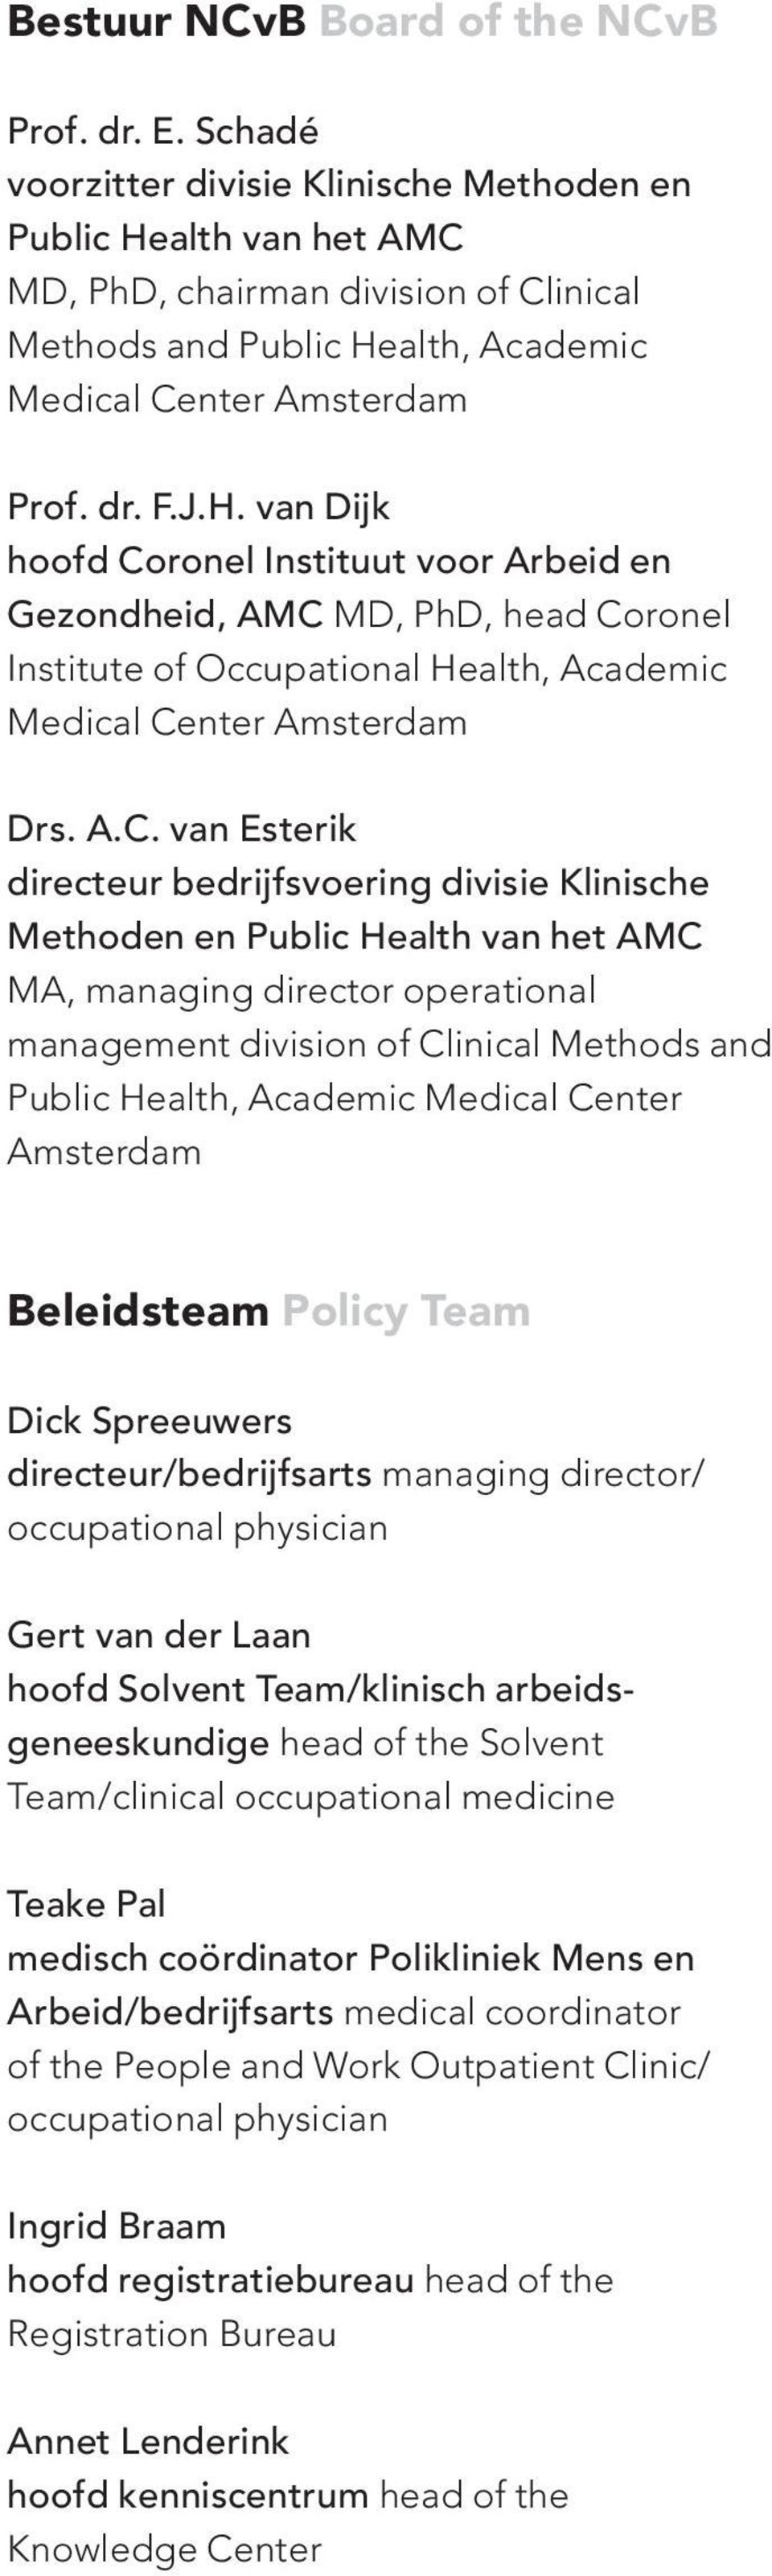 alth van het AMC MD, PhD, chairman division of Clinical Methods and Public He